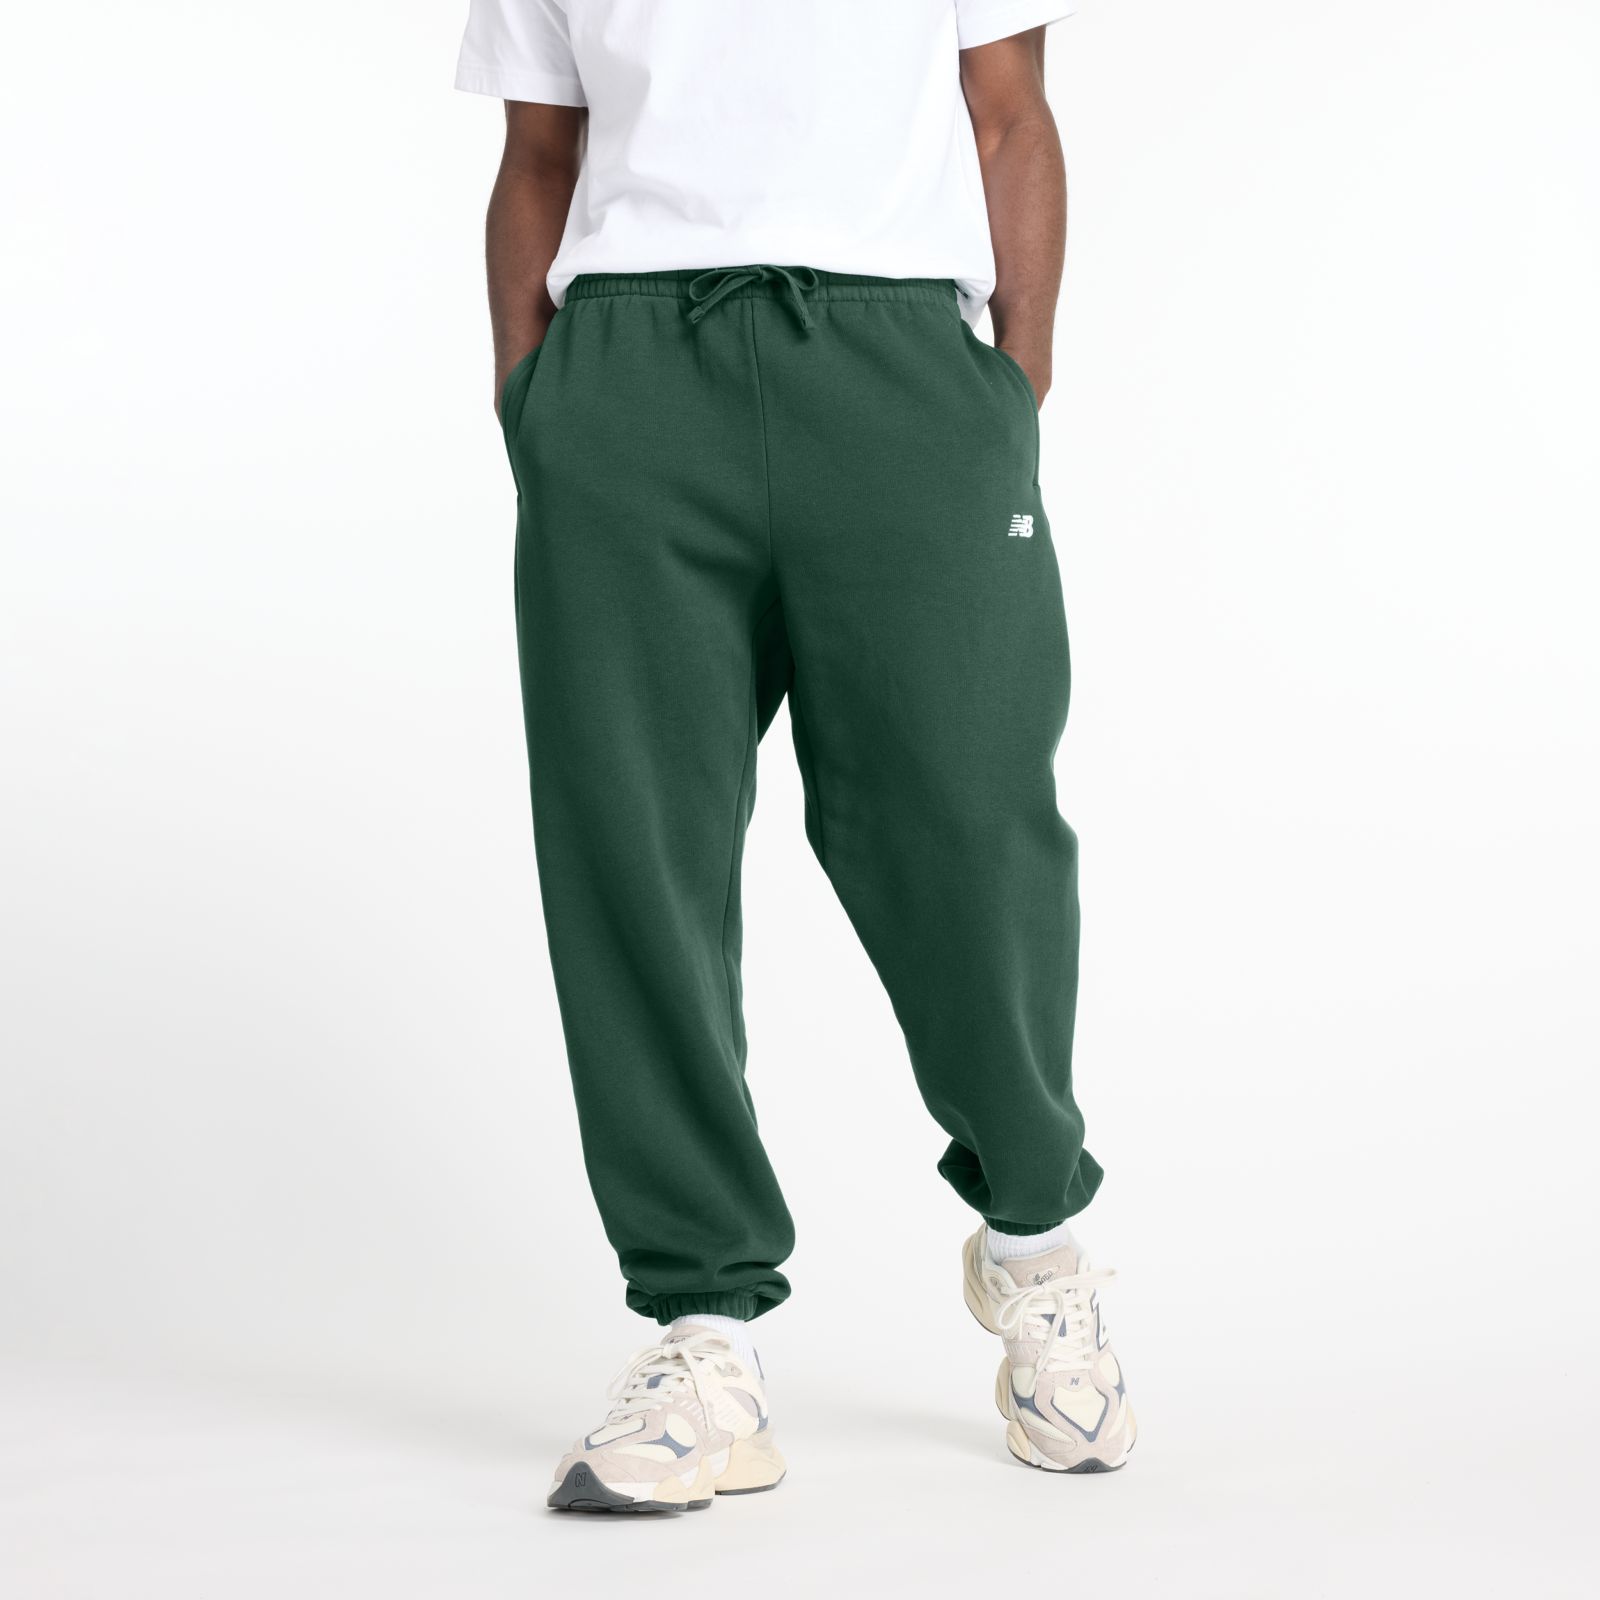 Real Essentials 3 Pack: Men's Tech Fleece Ultra-Soft Warm Jogger Athletic  Sweatpants with Pockets (Available in Big & Tall) 